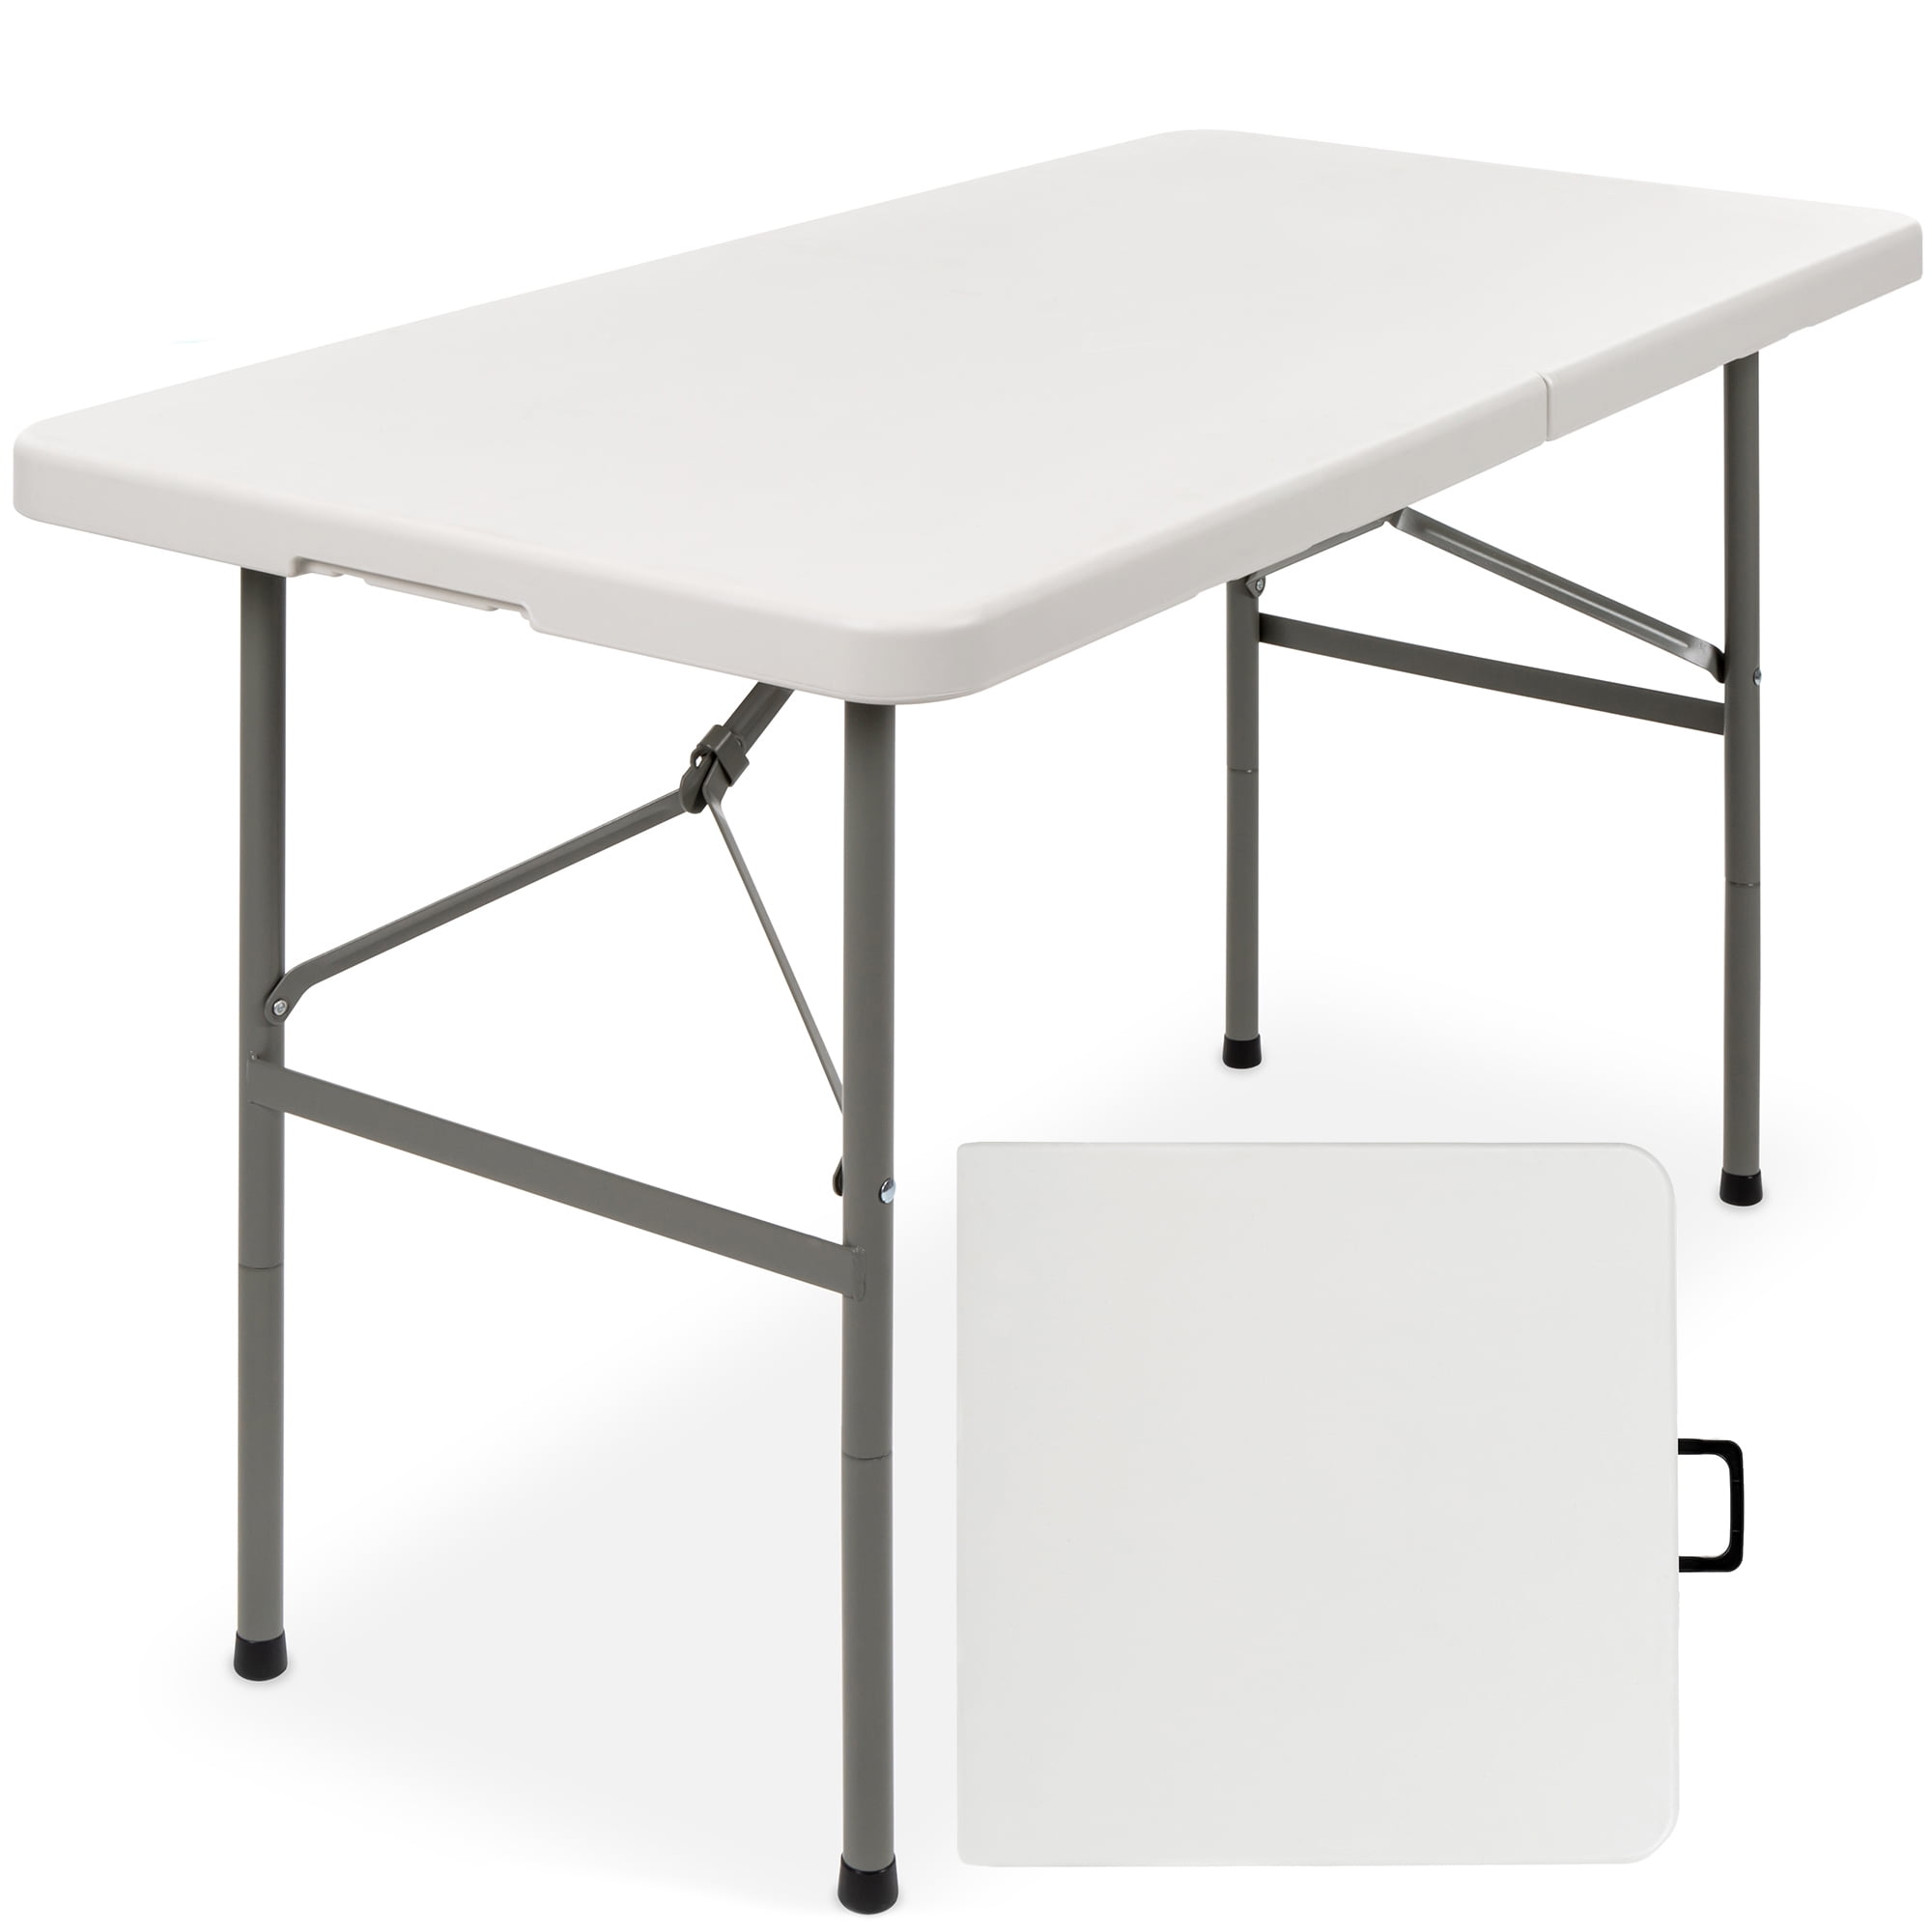 Large Plastic Table Folding Top & Legs 5ft Camp Outdoor/Indoor Lightweight Party 